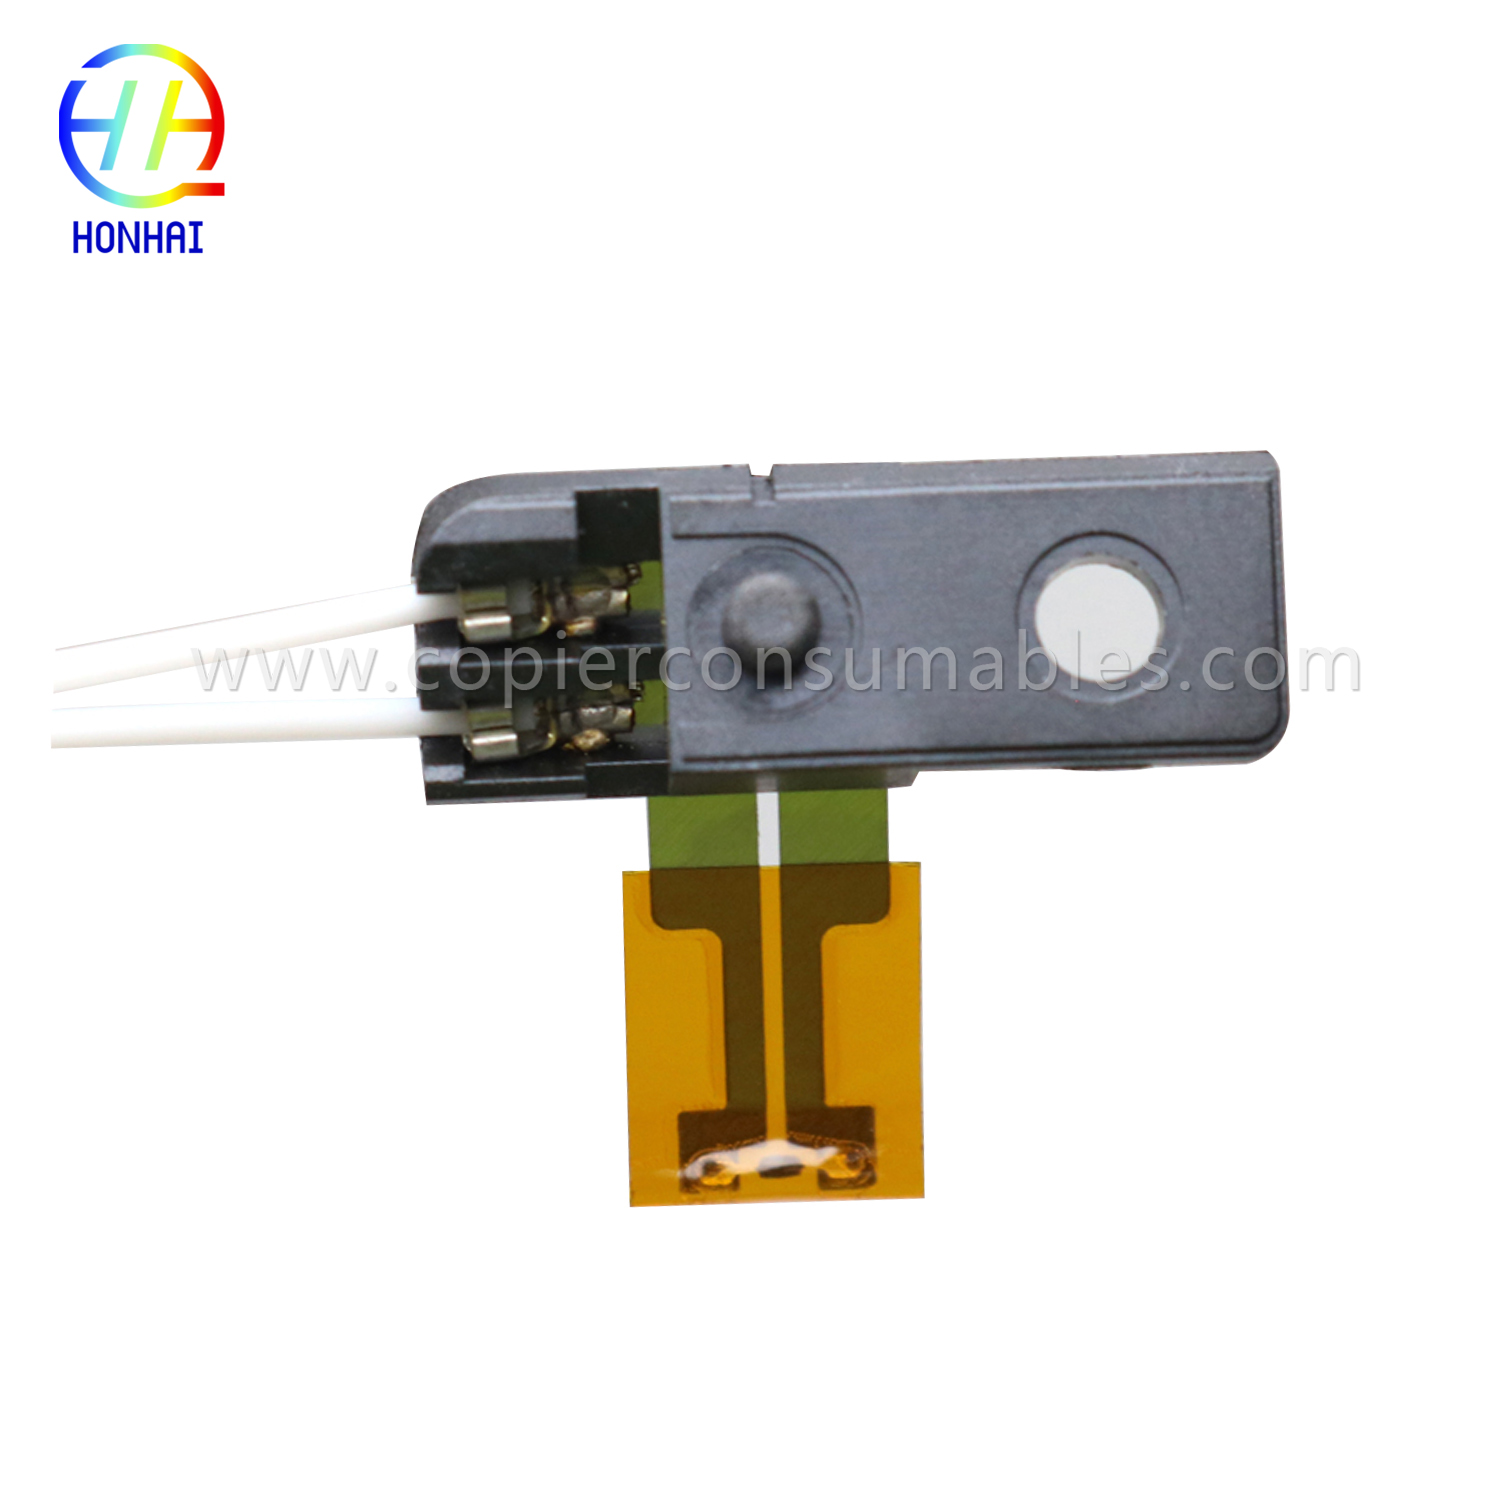 Fuser Unit Thermistor for Xerox P4 3370 3375 3373 7830 7835 7845 7855 7525 7535 7545 7556 4470 4475 5570 5575 Original Disassembly Accessories (3).